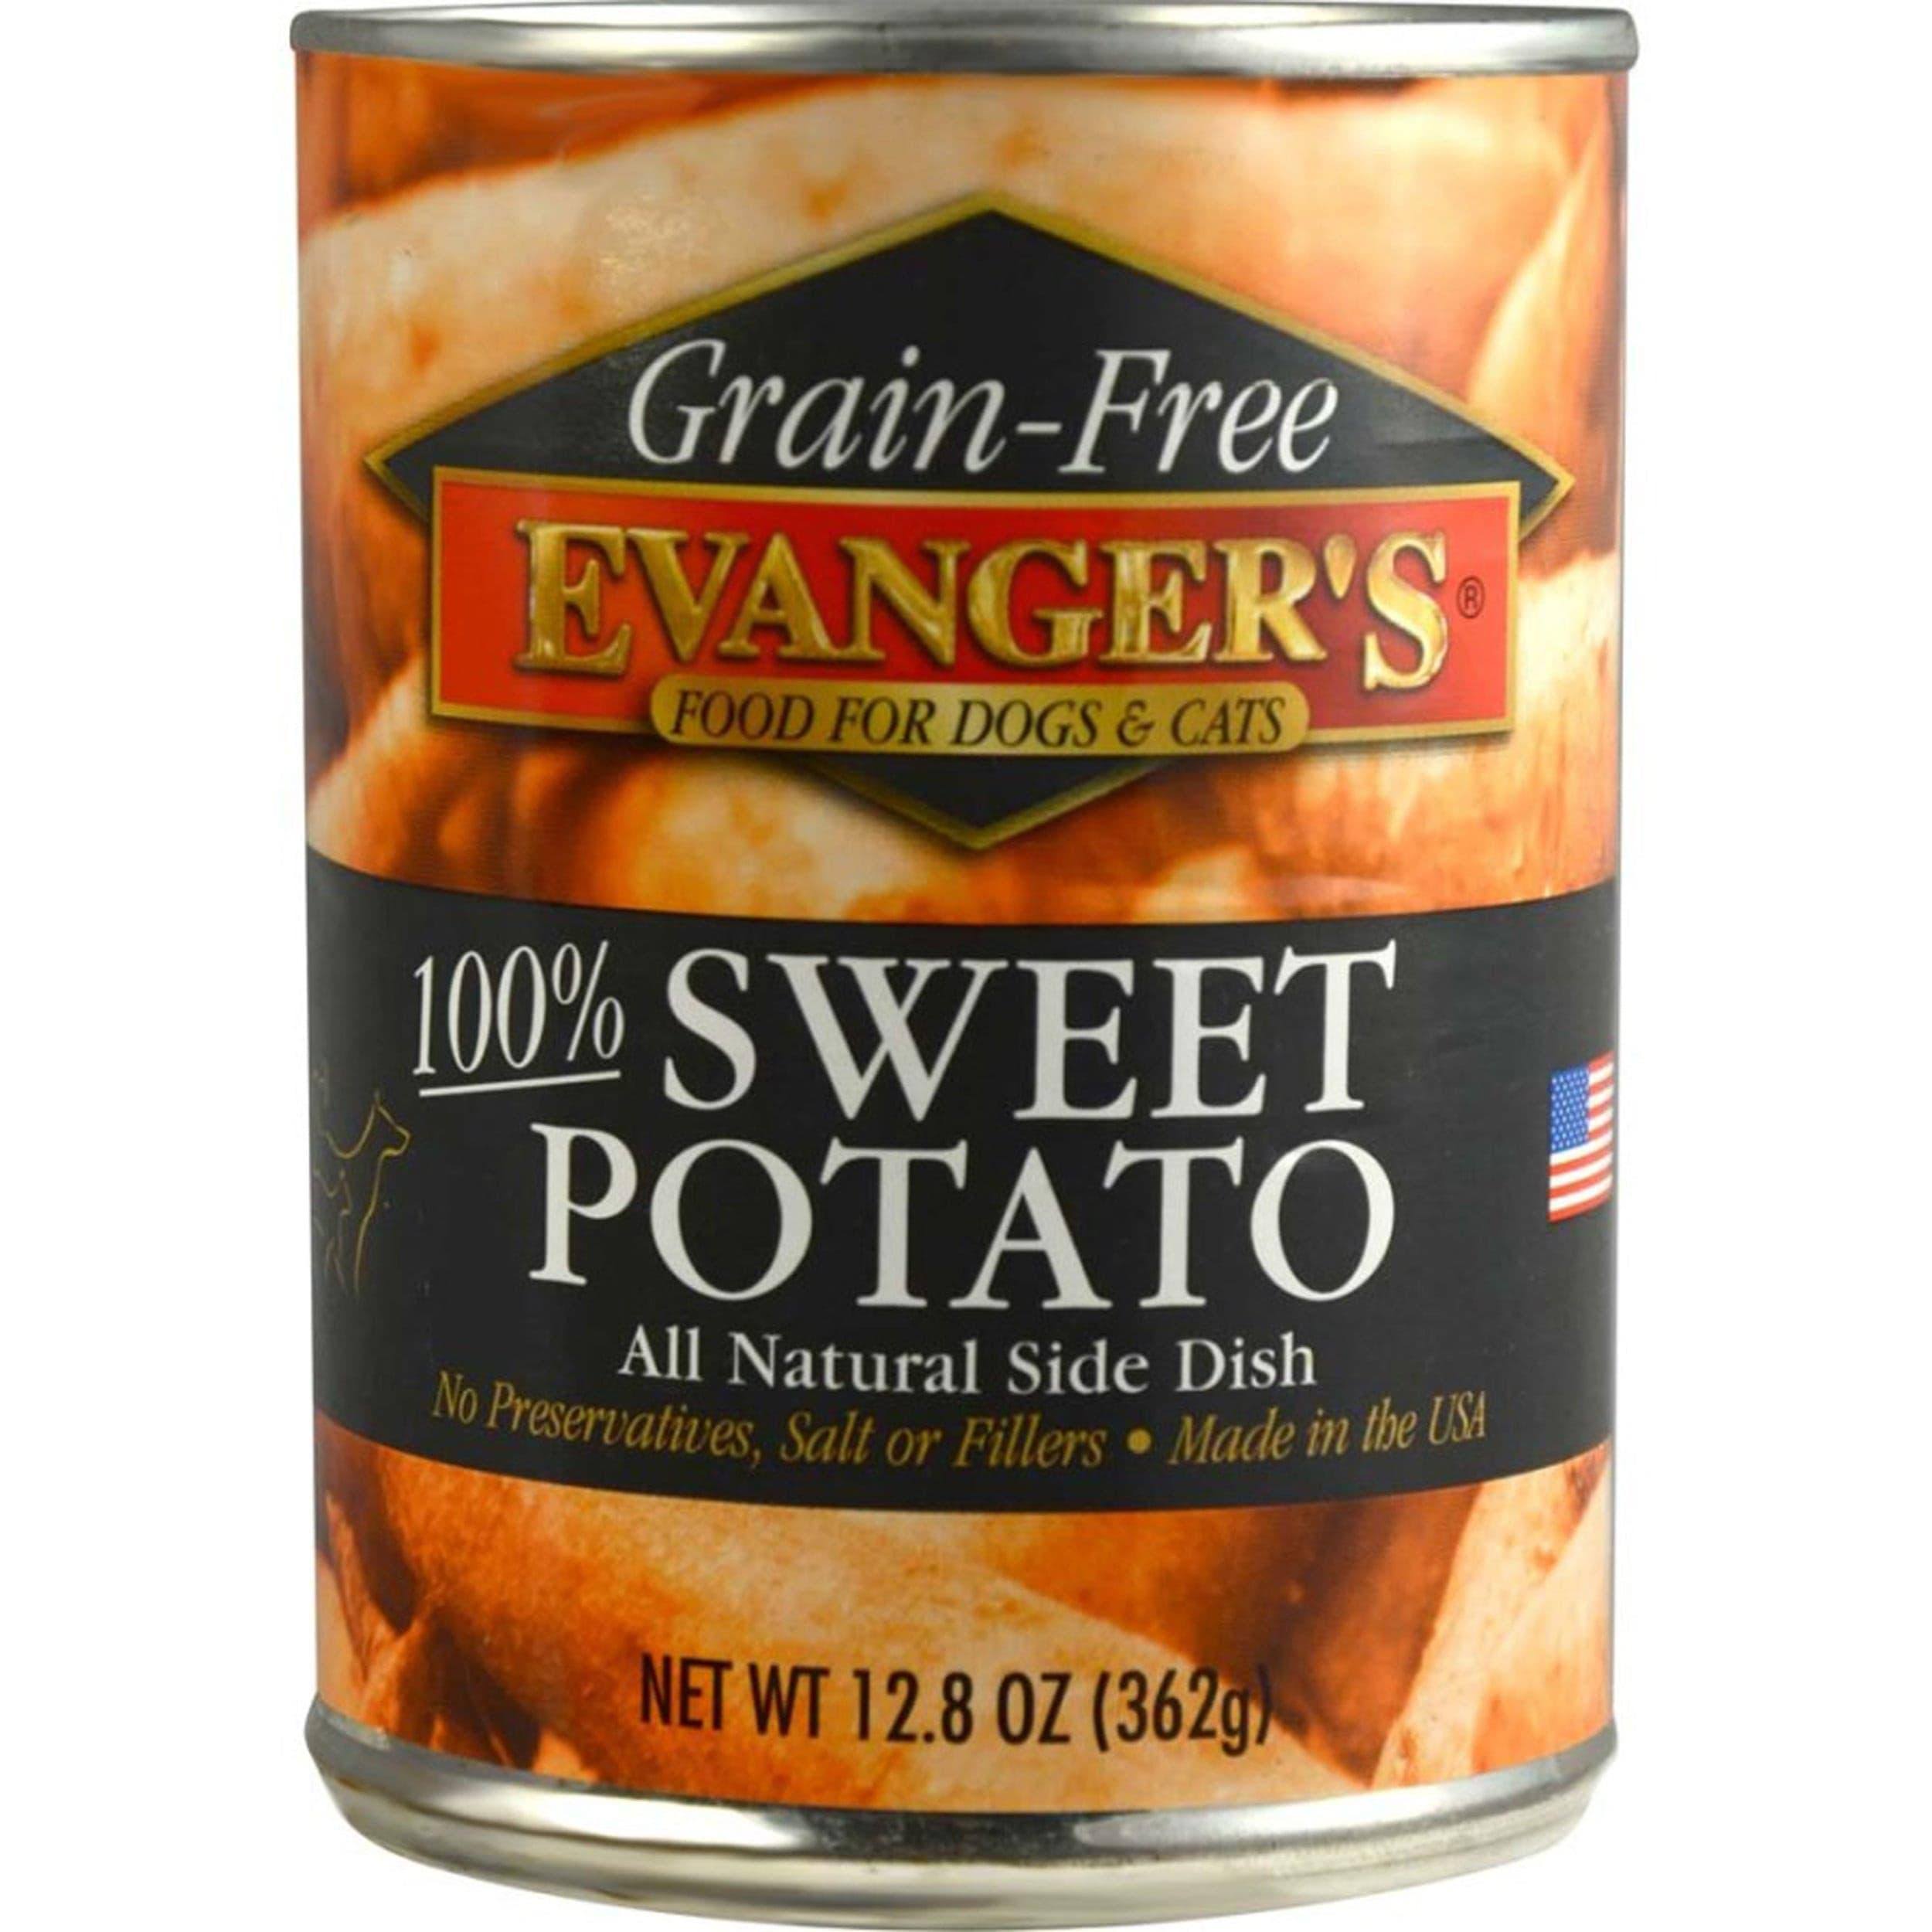 Evanger's Grain-Free Food for Dogs and Cats - Sweet Potato, 13oz